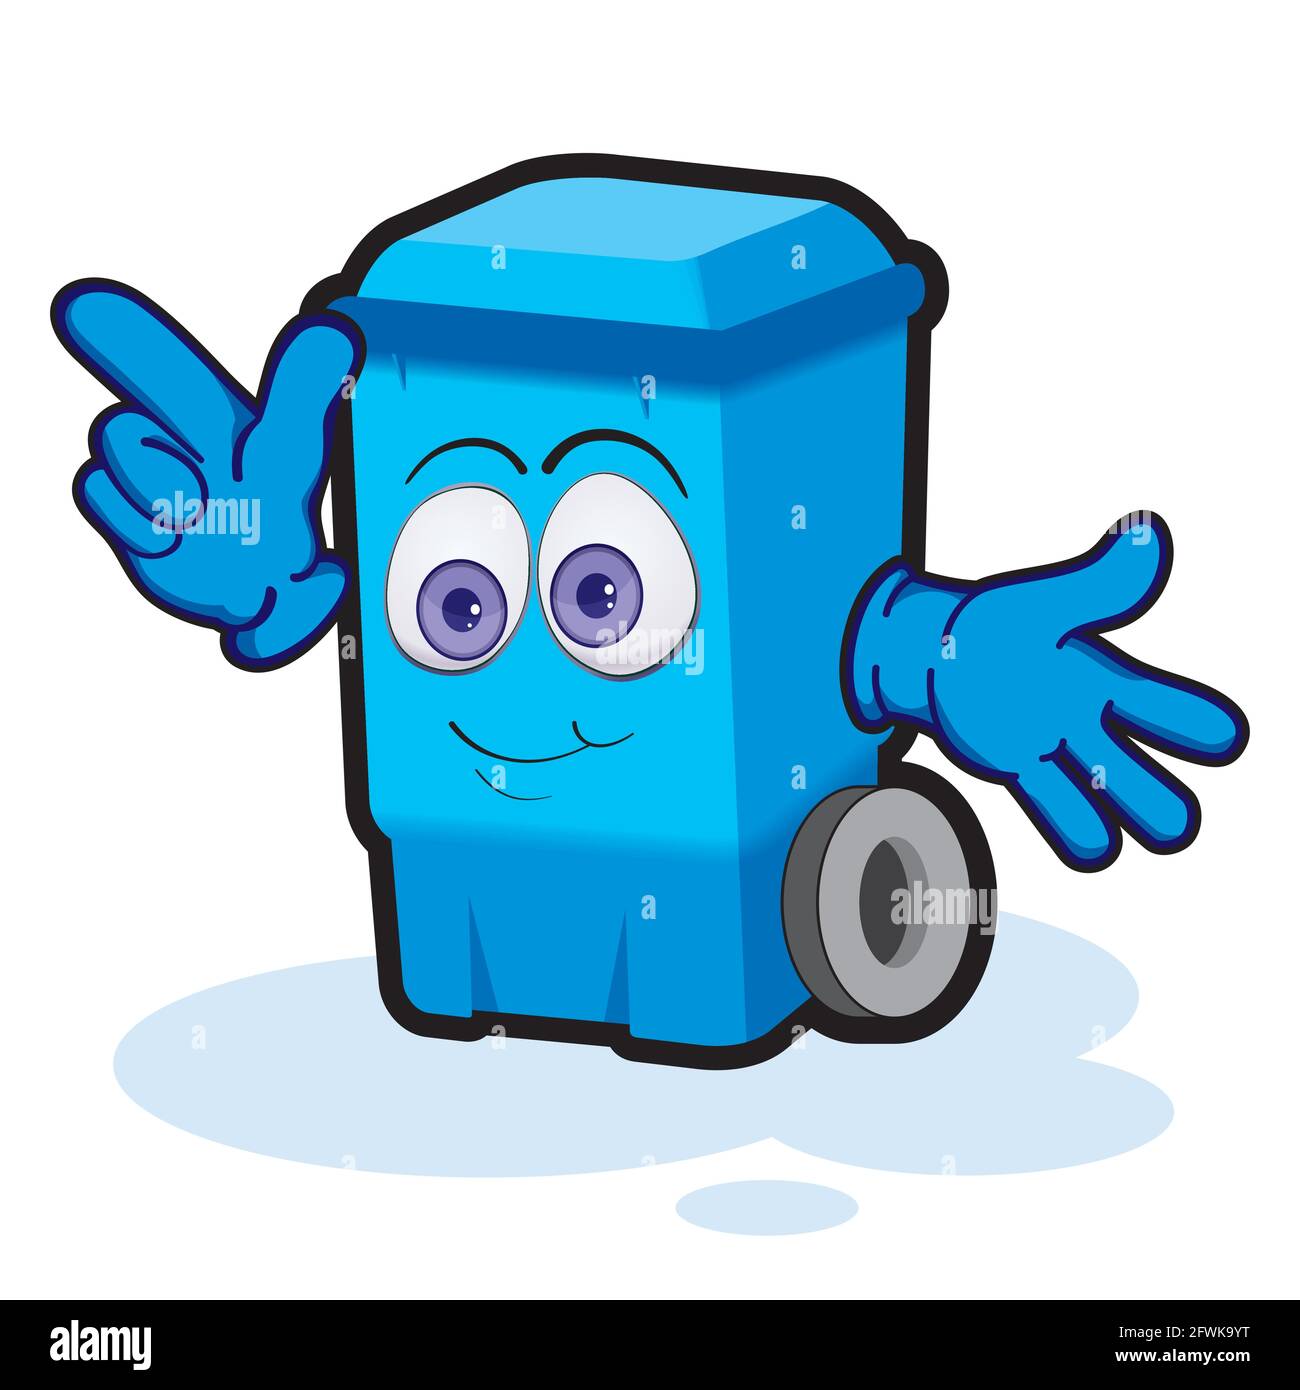 Recycling character Banque d'images vectorielles - Page 3 - Alamy